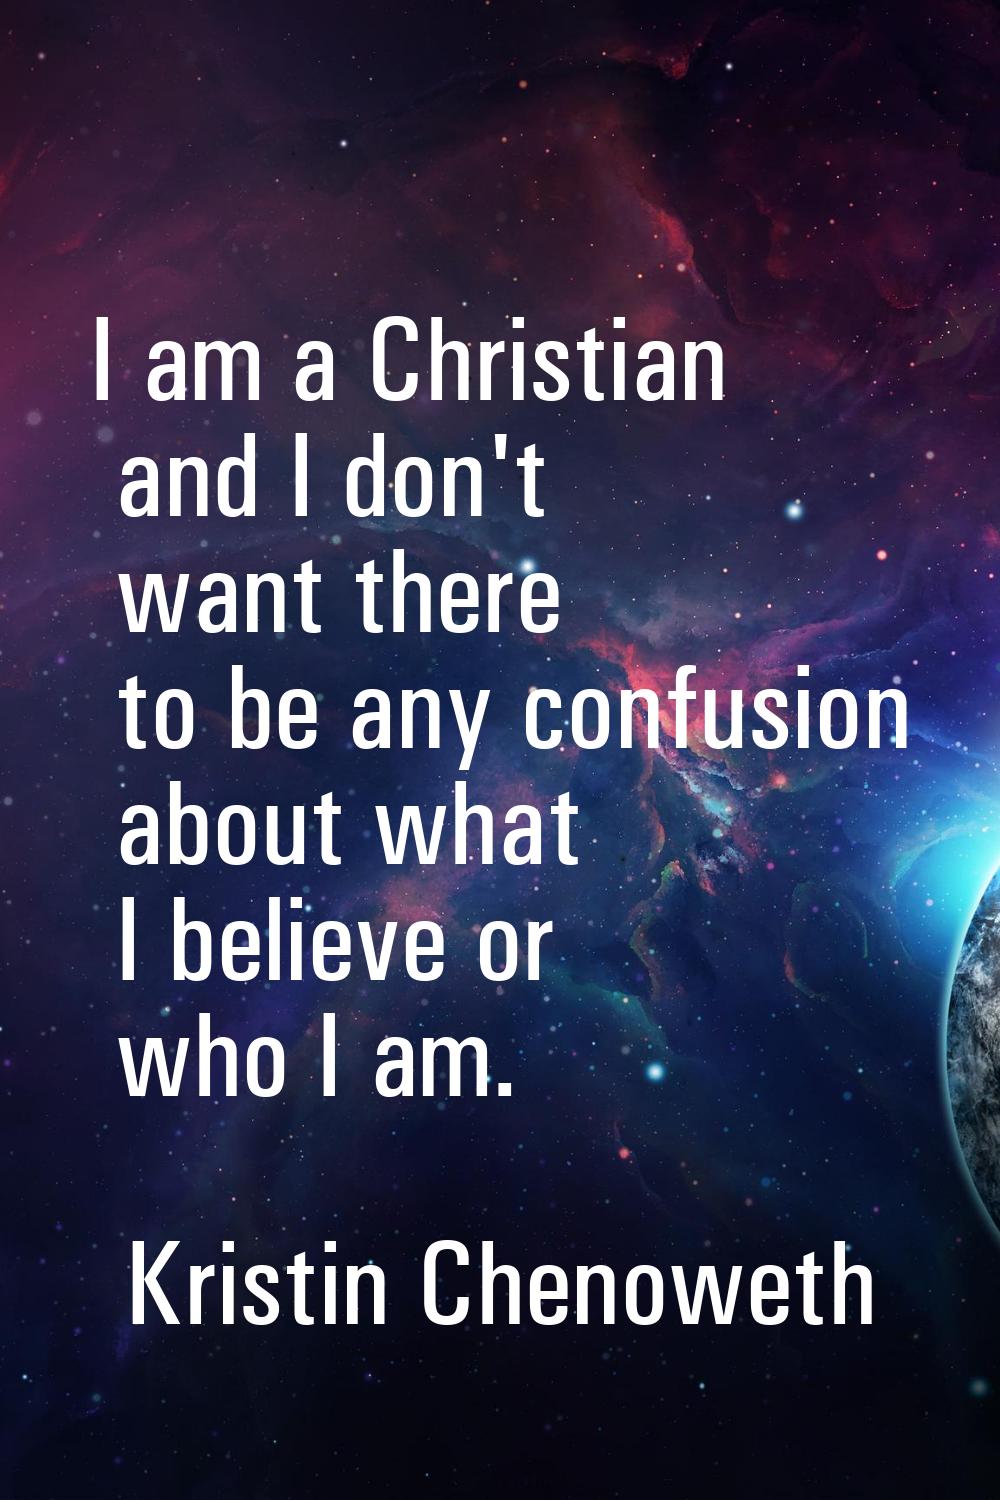 I am a Christian and I don't want there to be any confusion about what I believe or who I am.